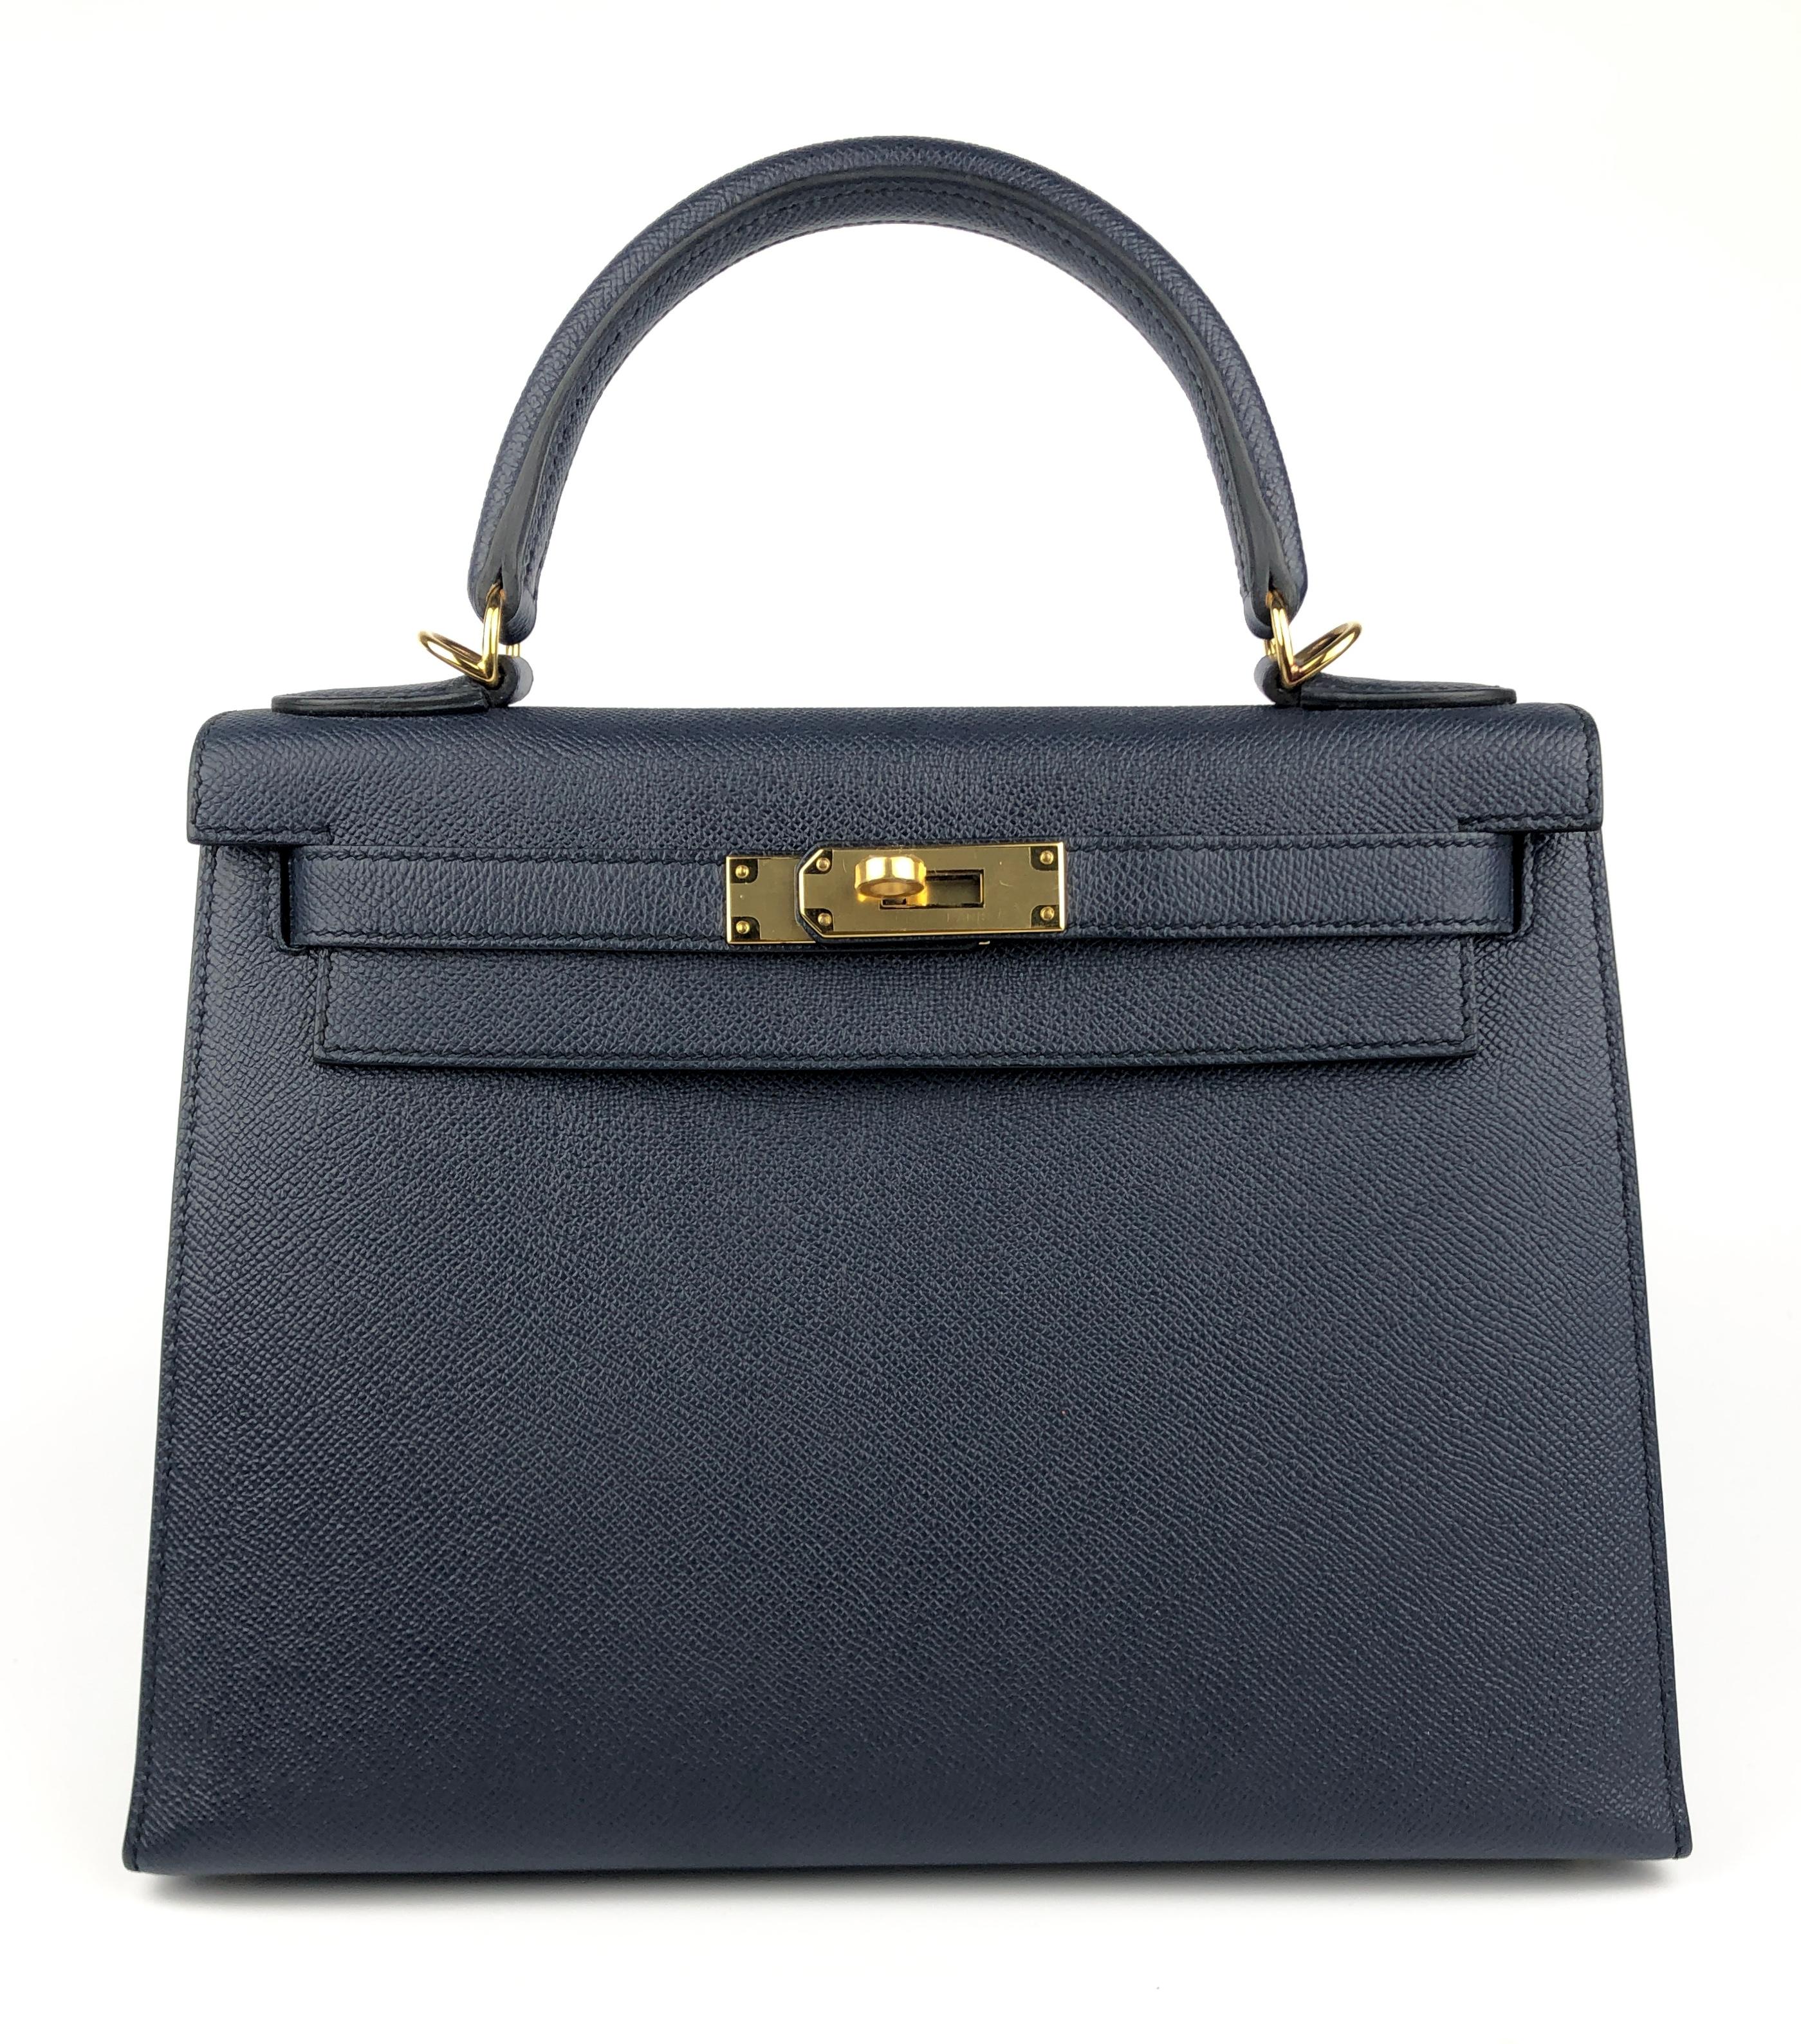 Absolutely Stunning Pristine Hermes Kelly 28 Sellier Blue Sapphire Epsom Leather complimented by Gold Hardware. Plastic on all hardware and feet. 2017 A Stamp.

Shop with Confidence from Lux Addicts. Authenticity Guaranteed! 

Please keep in mind